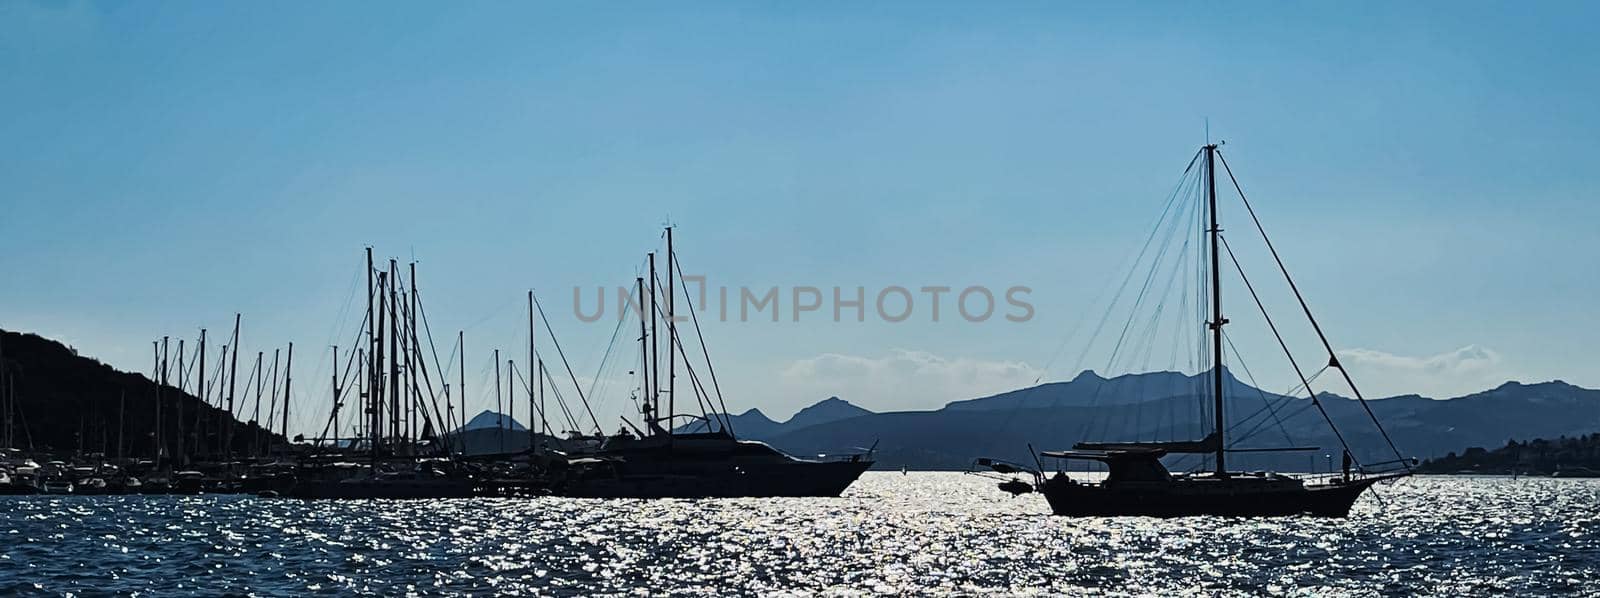 Tranquil seascape and coastal nature concept. Sea, boats, mountains and blue sky over horizon at sunset.